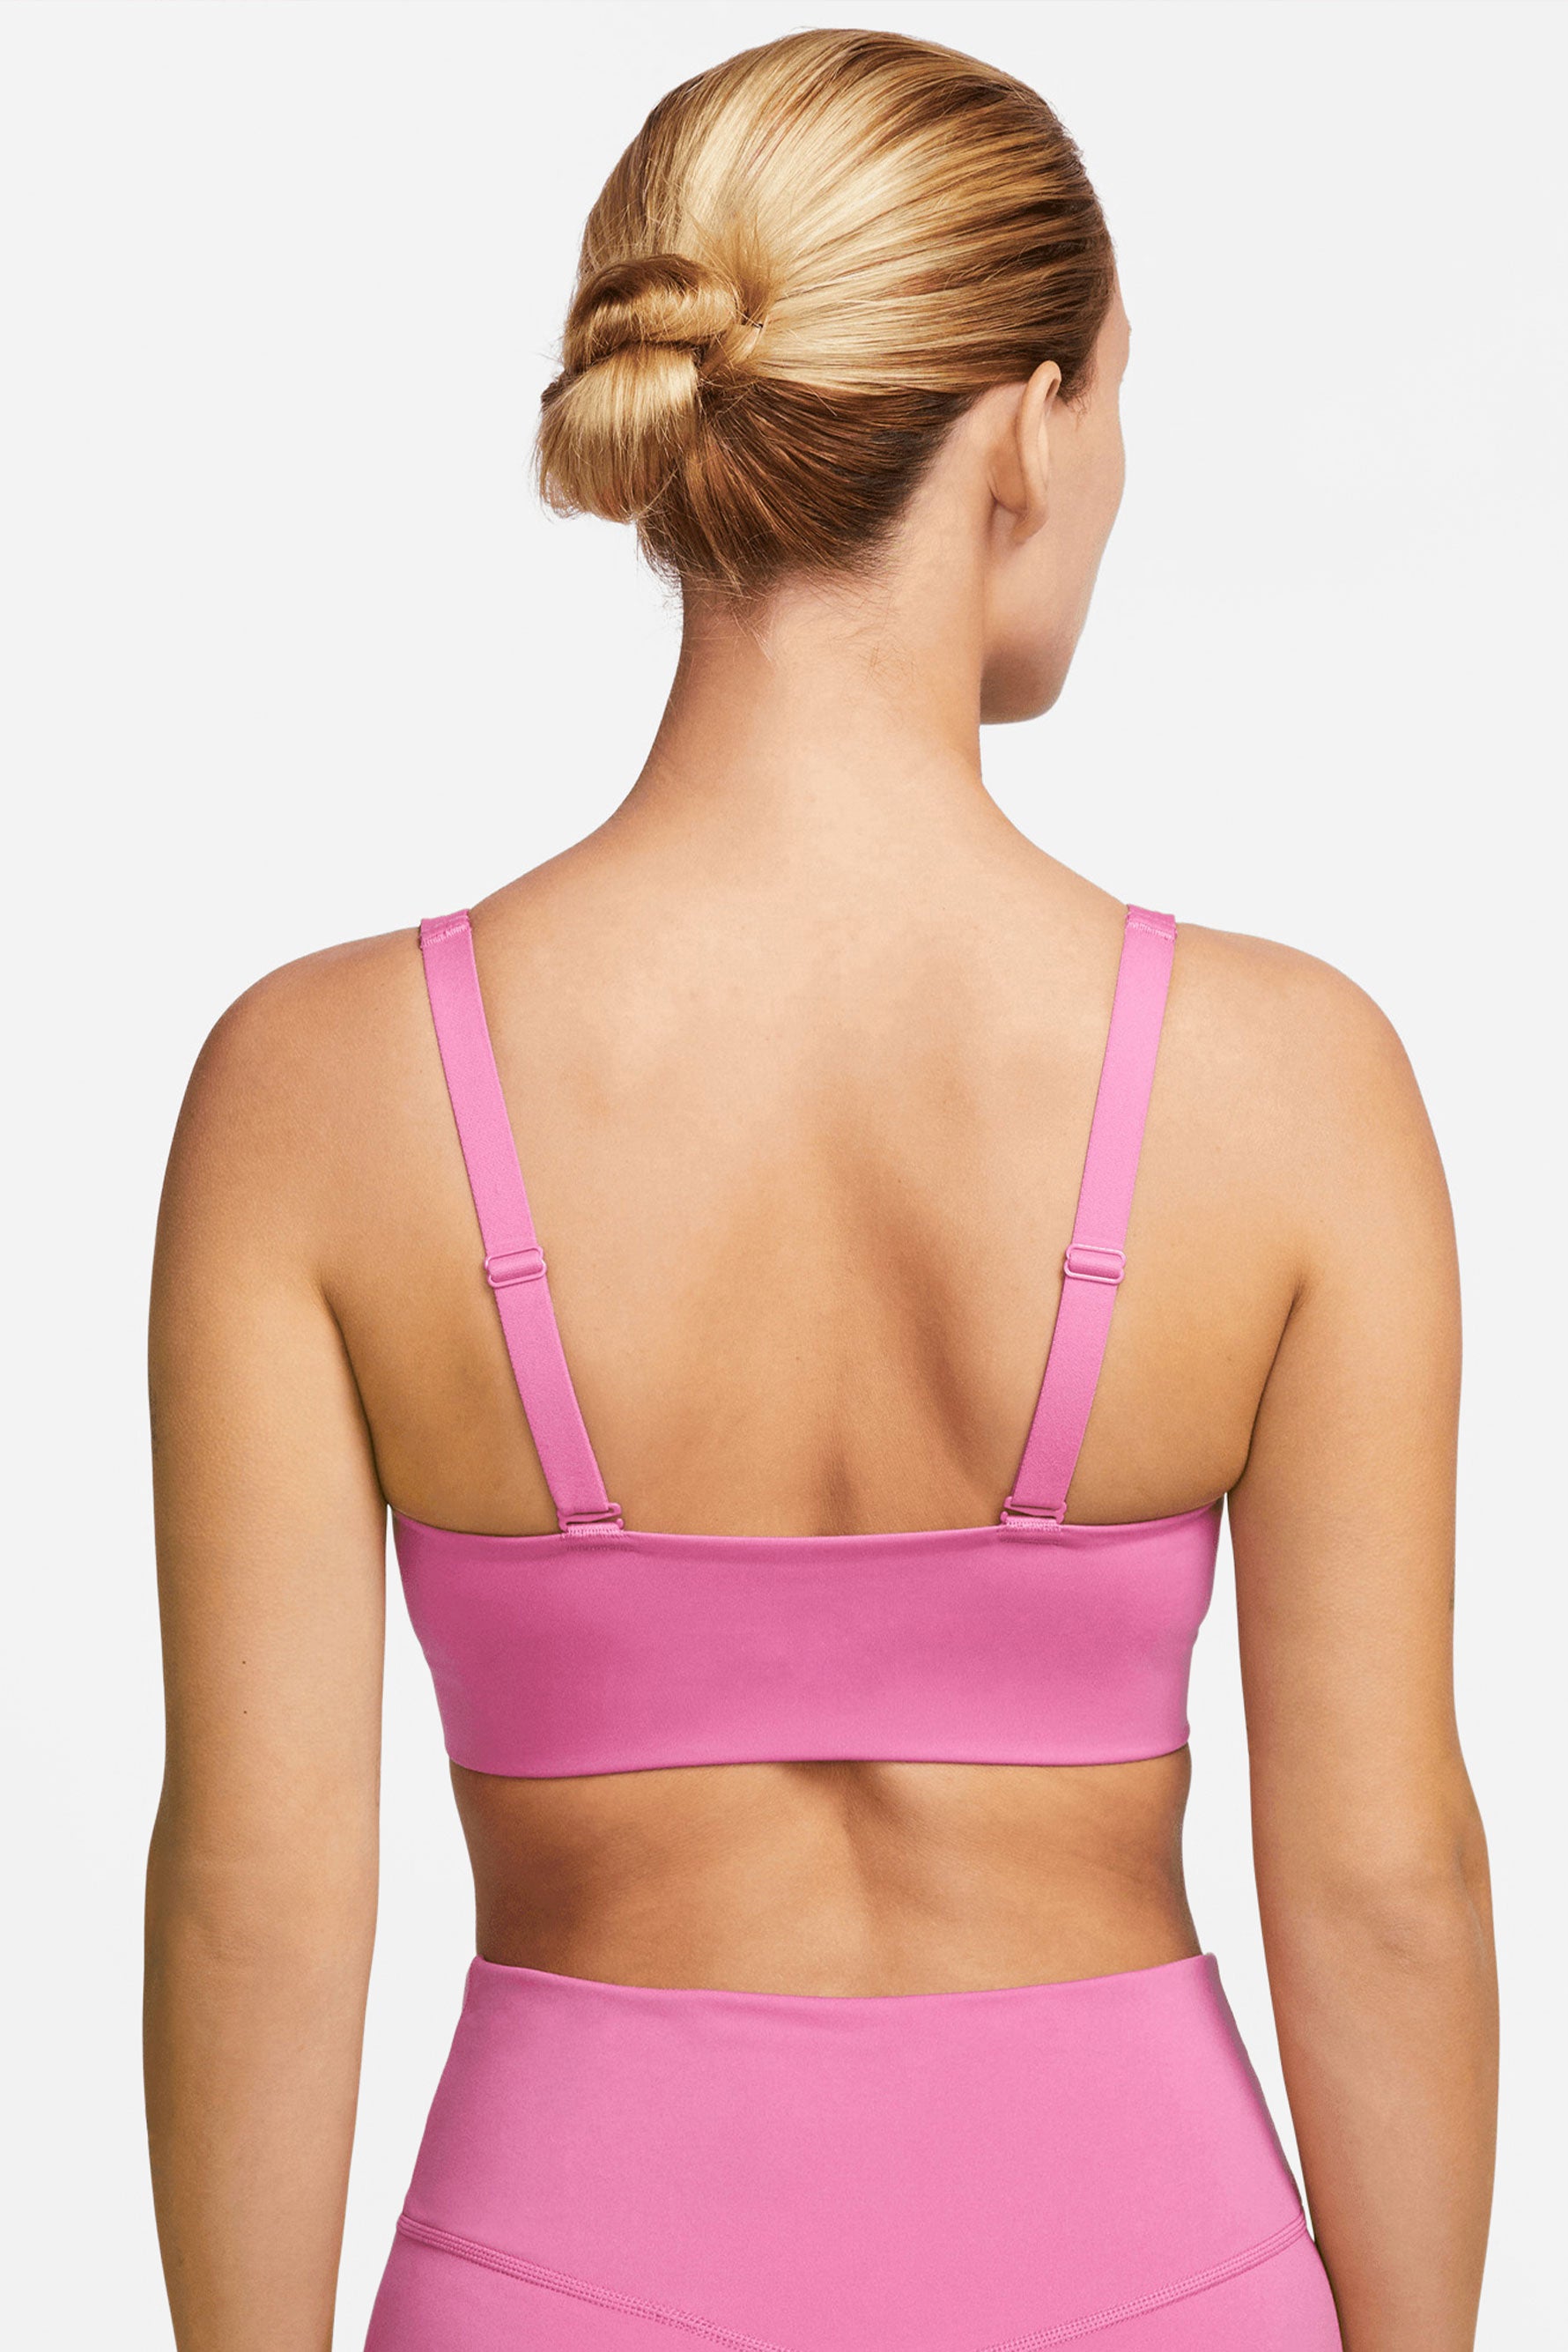 Nike Indy Sports Bra Pink Size M - $30 (25% Off Retail) - From Valeria